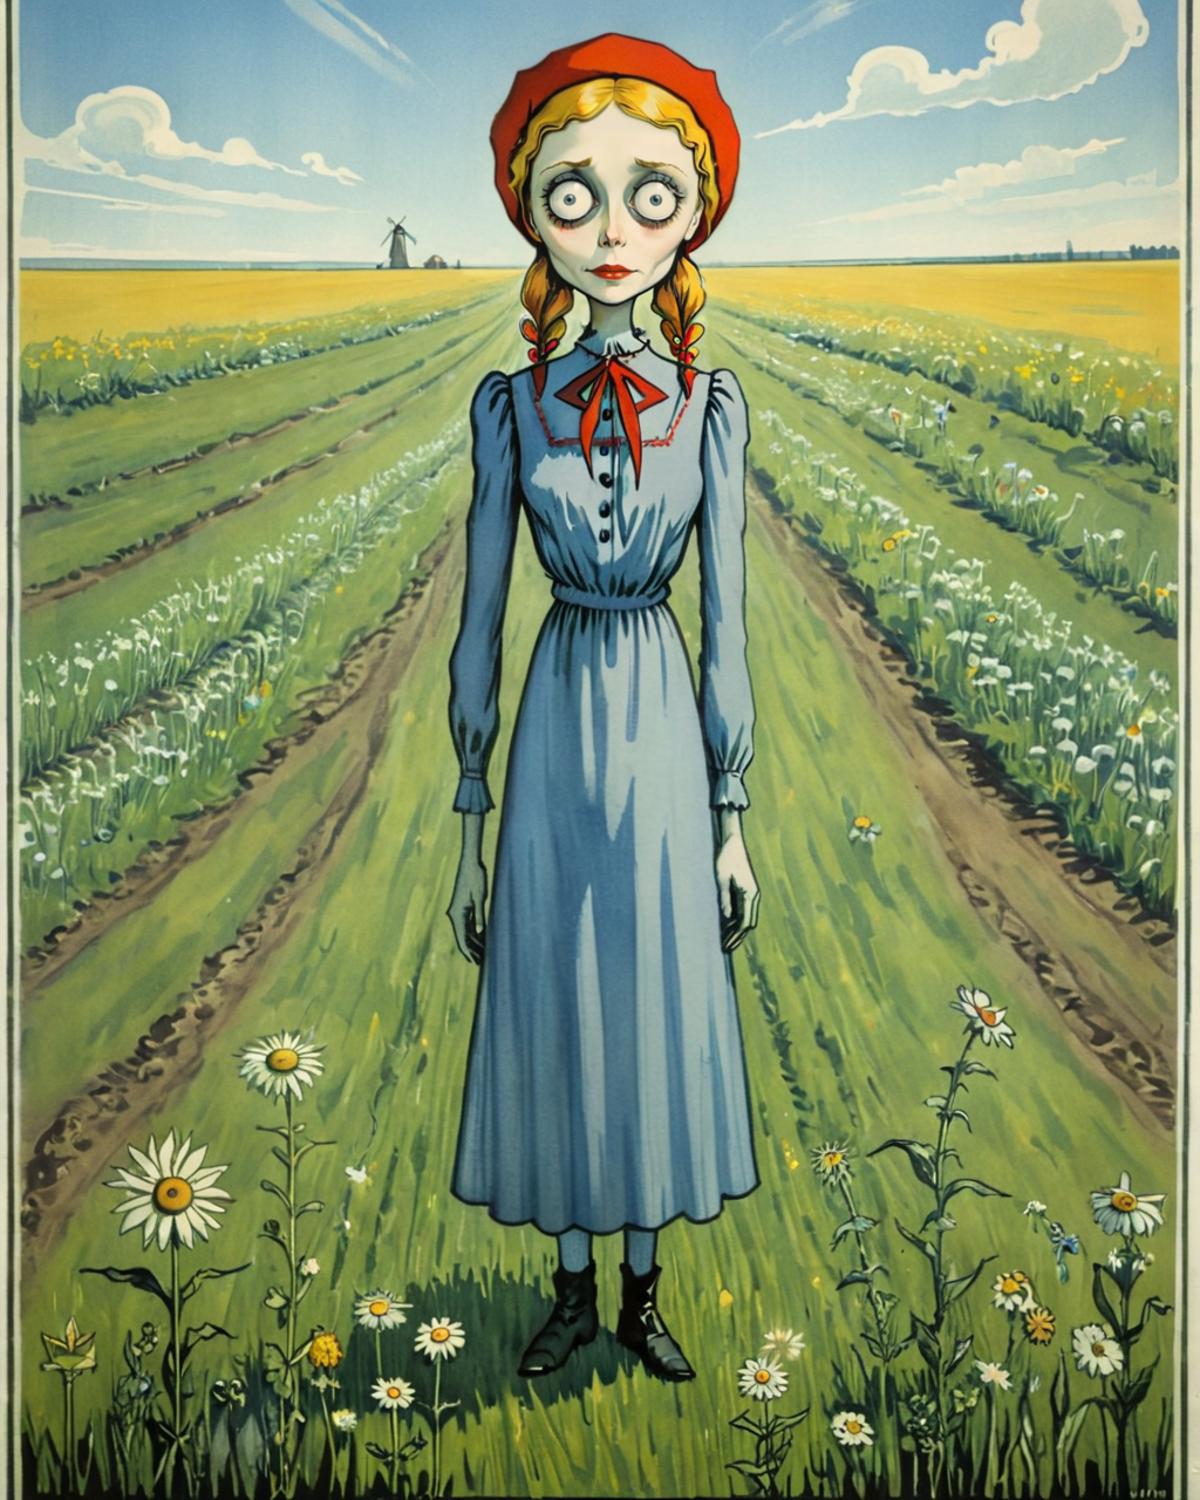 A girl with red hair and a blue dress standing in a field of flowers.